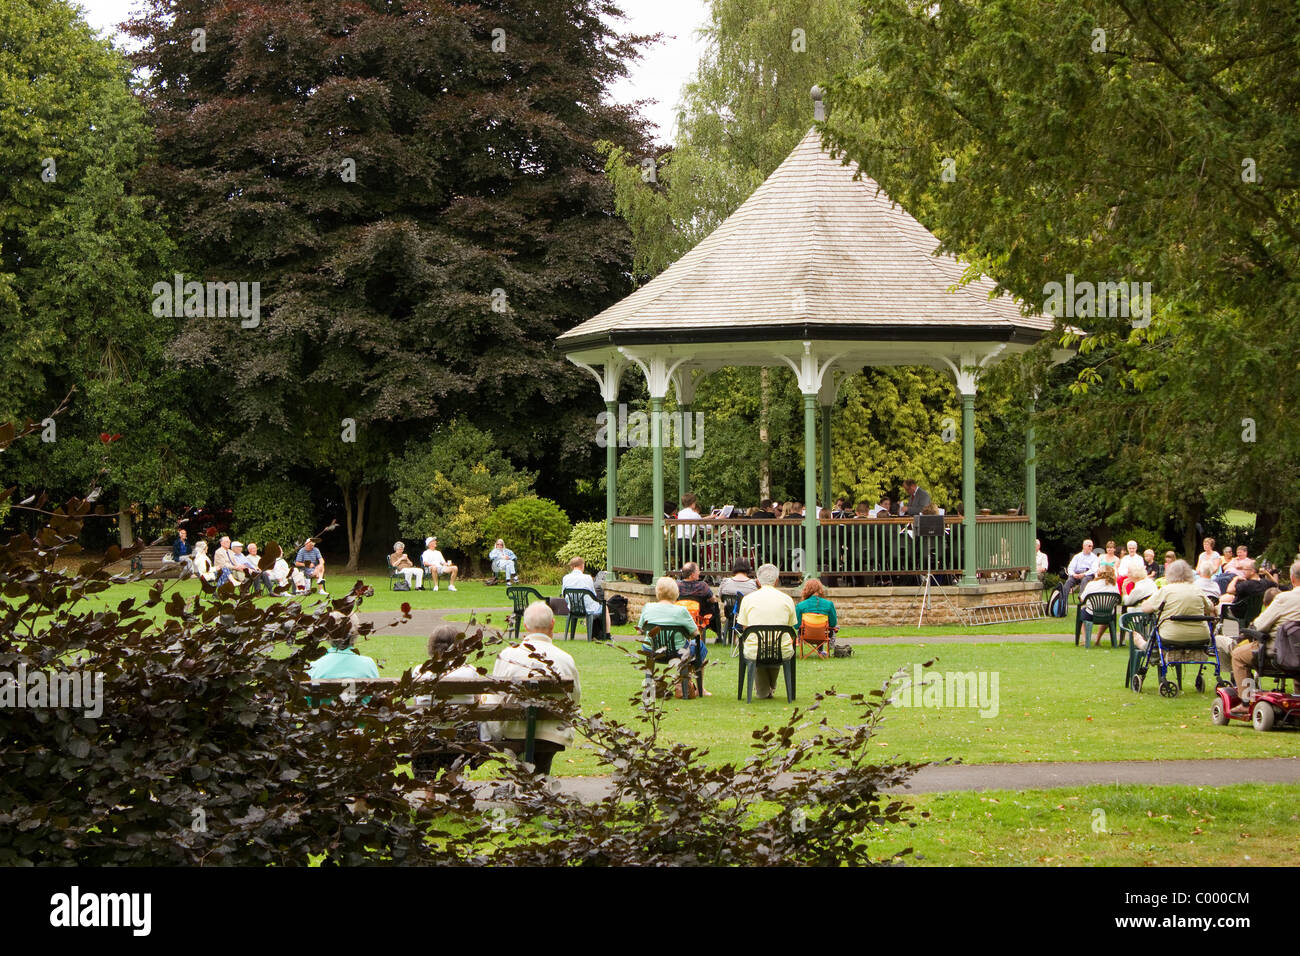 Summer concert in the Bandstand in Town Park, Melton Mowbray Stock Photo